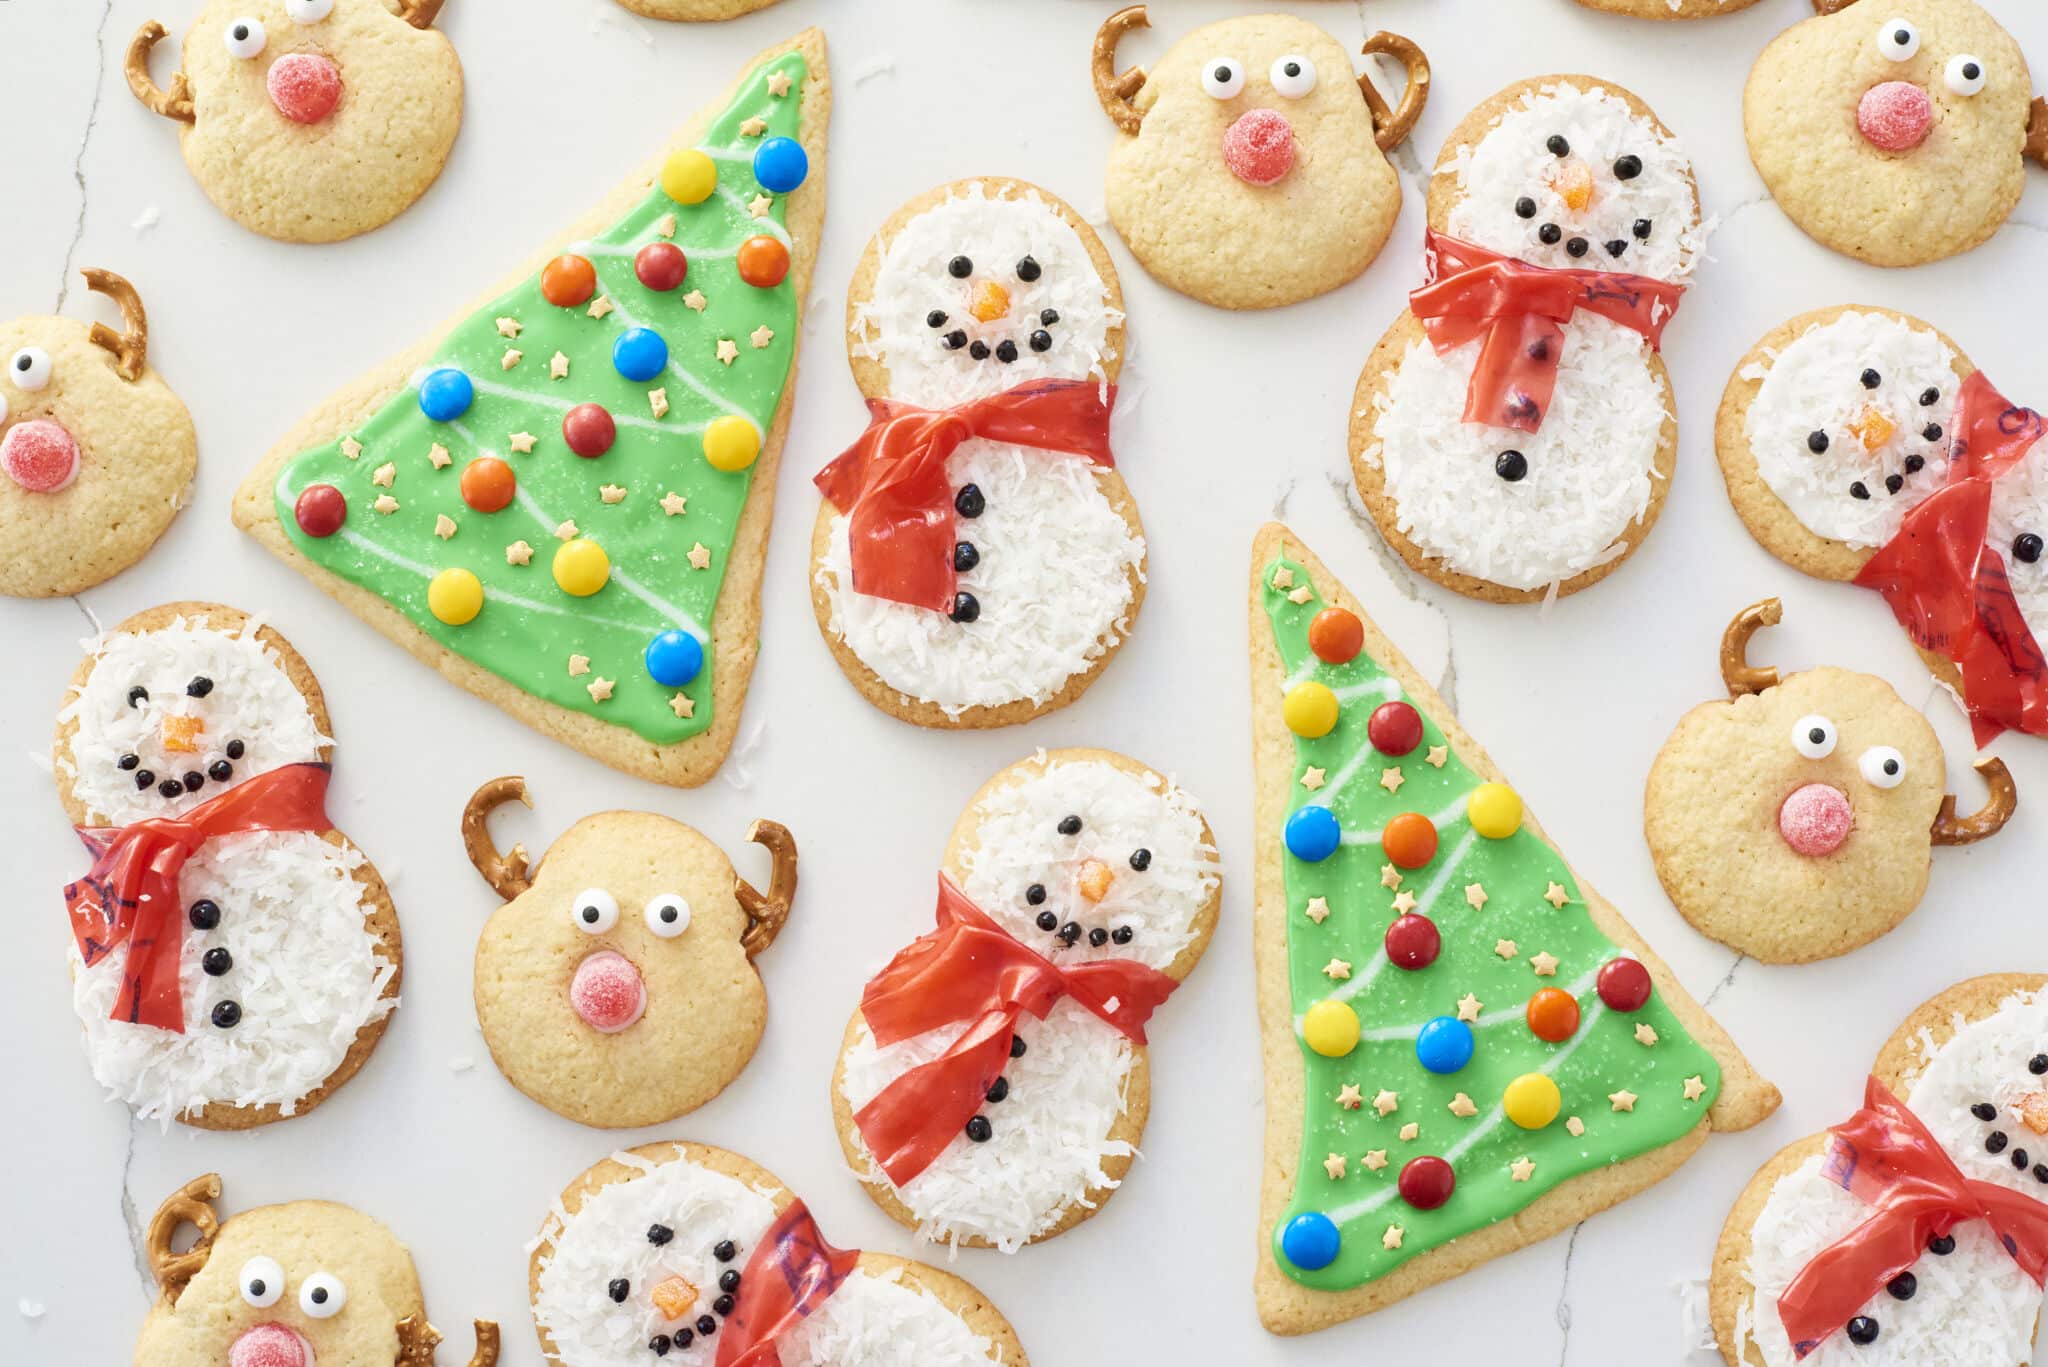 Three differently decorated sugar cookies are presented on a white table. They are Christmas Tree Cookies, Snowman Cookies, and Reindeer Cookies.